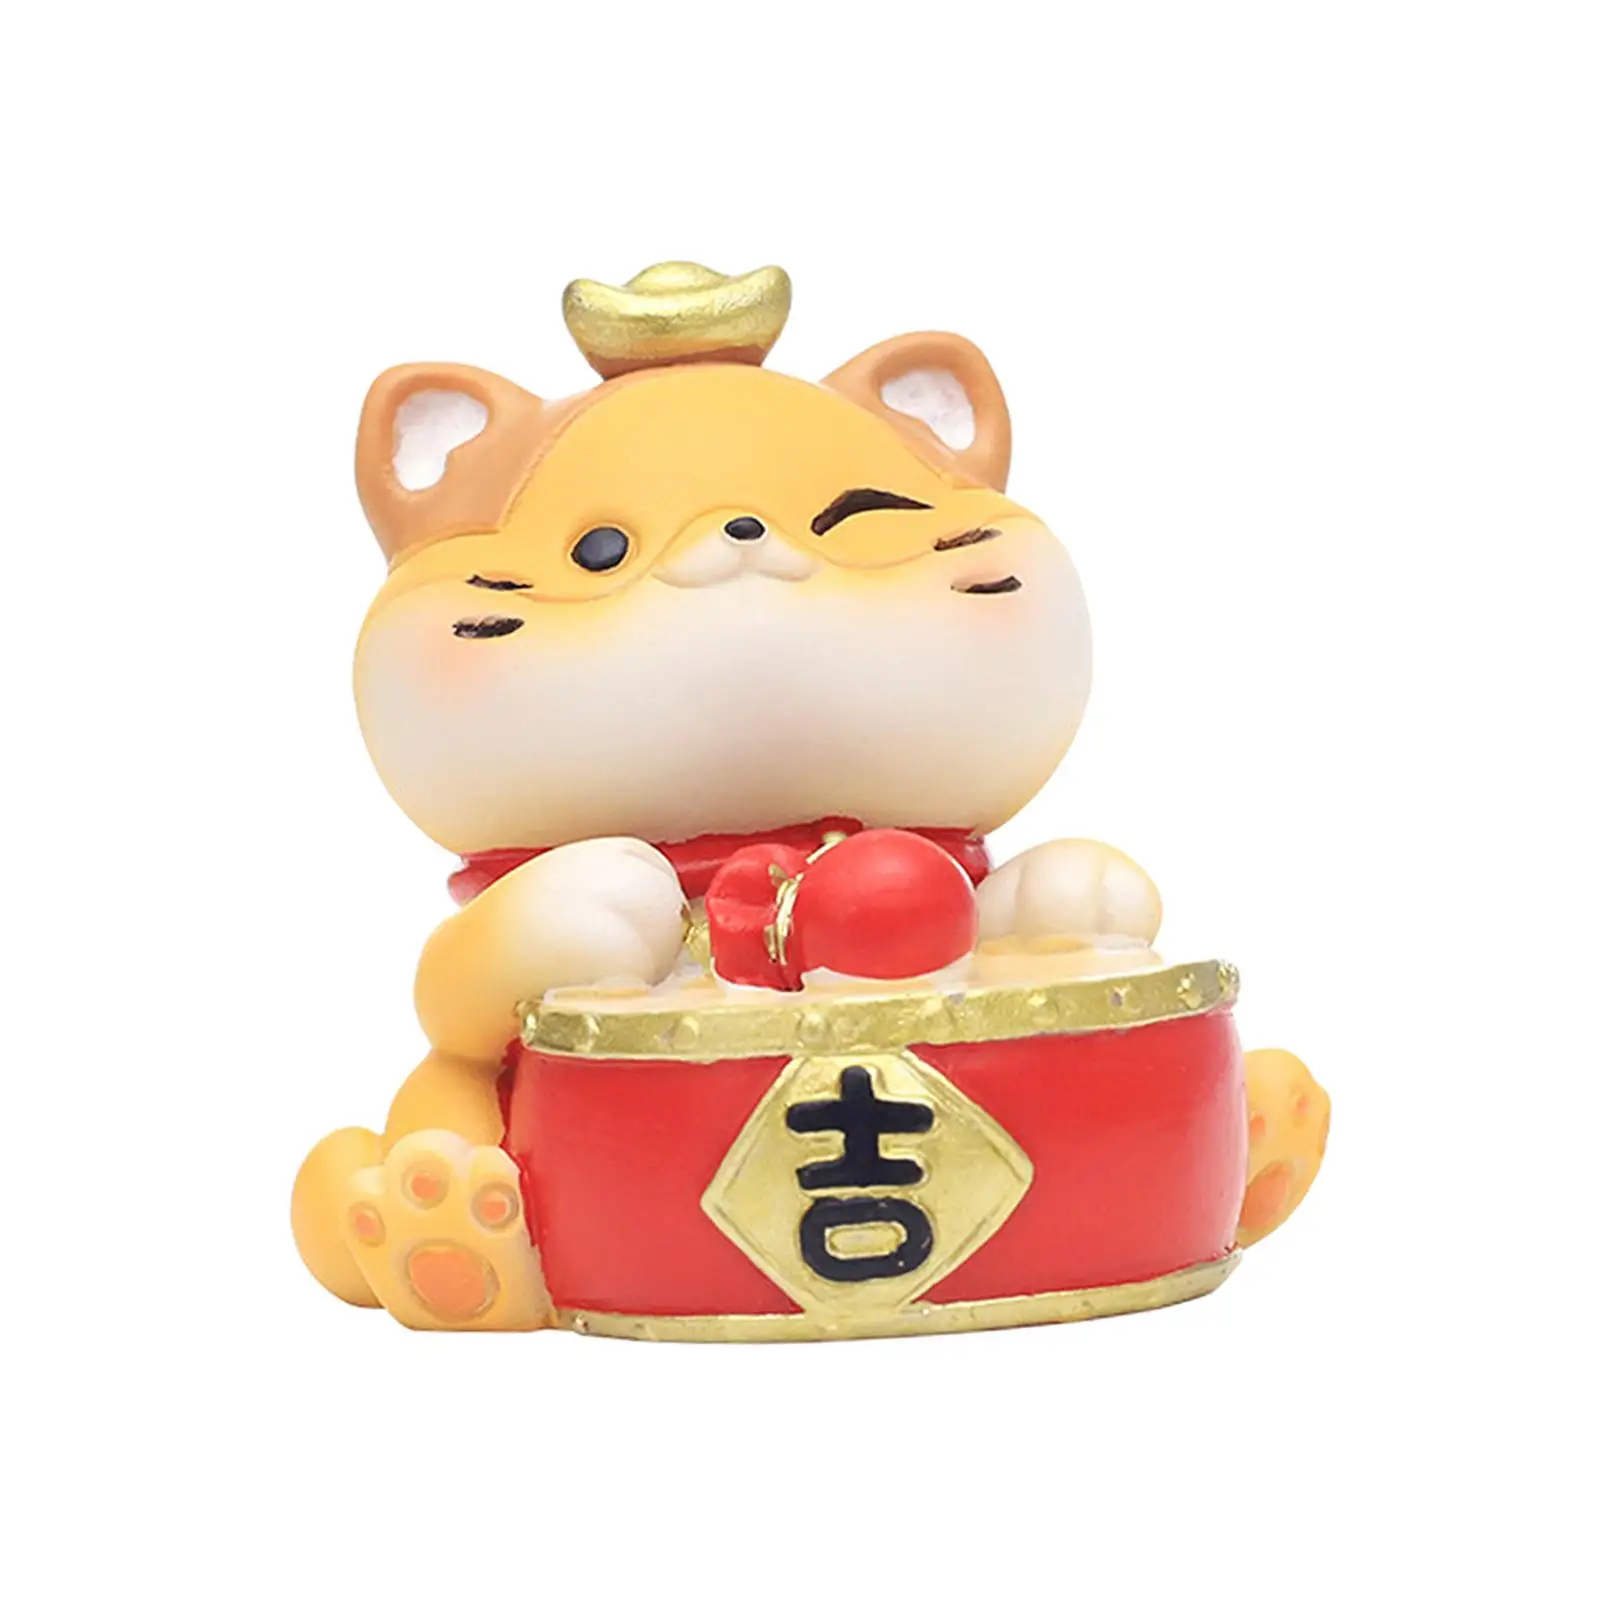 Lucky Cat Figurine Miniature Figurine Tabletop Ornament Animal Sculpture for Desk Living Room Fireplace Office New Year Gift